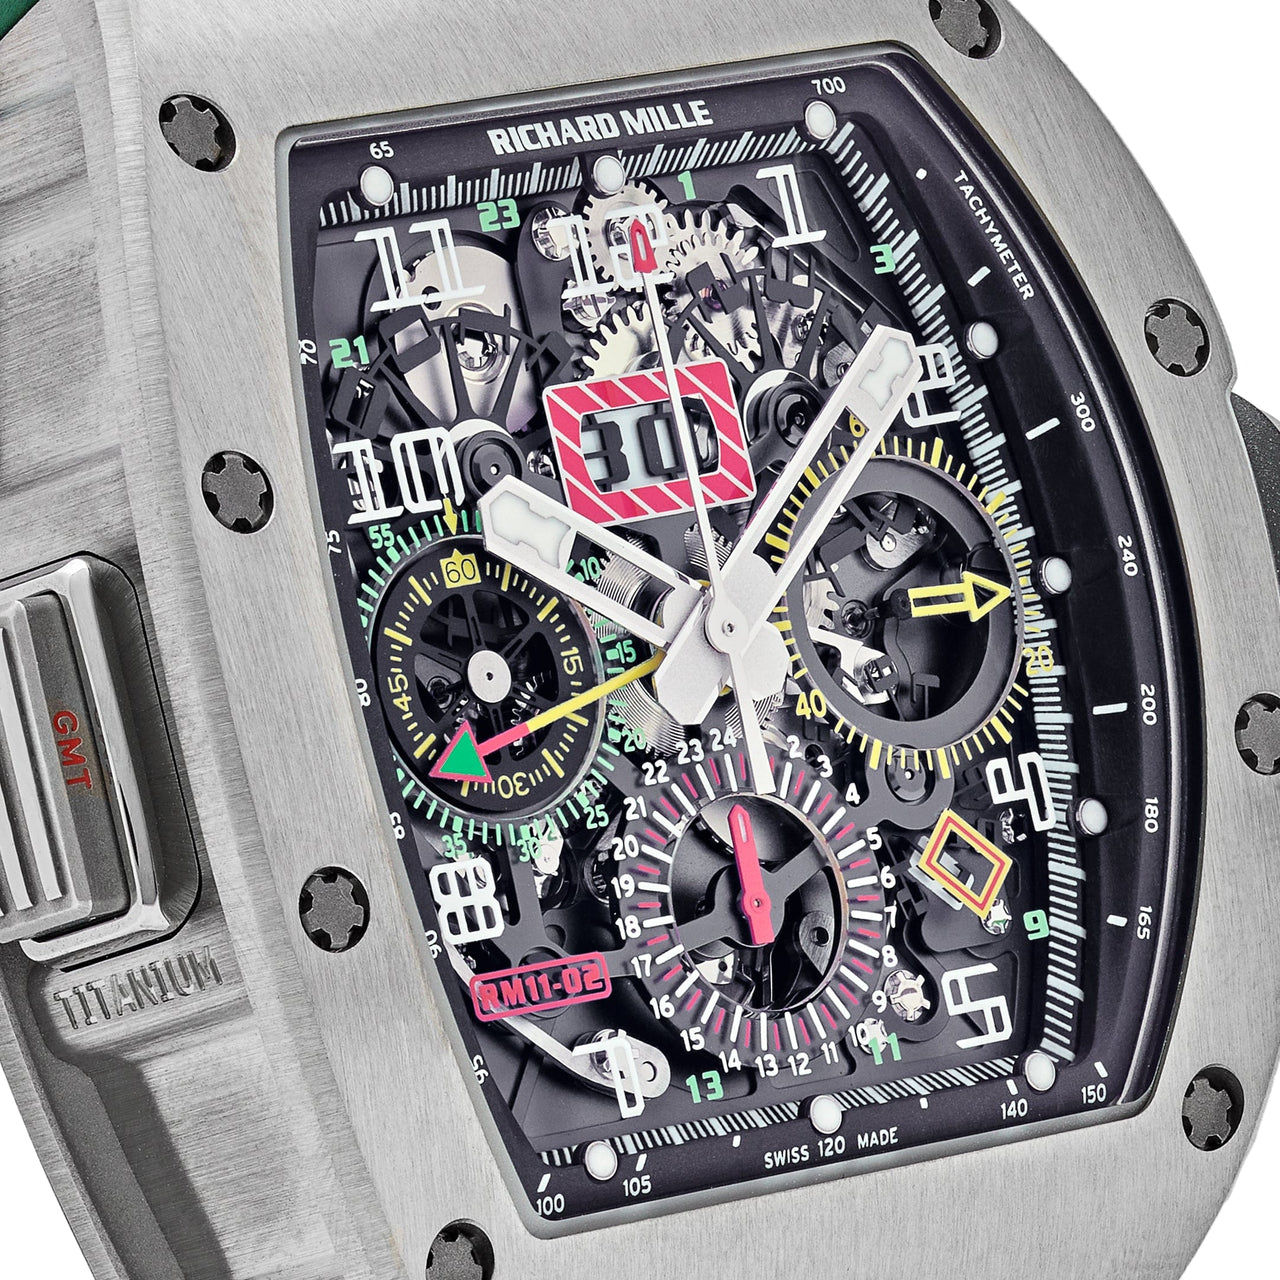 Richard Mille RM 11-02 Titanium Flyback Chronograph GMT Openworked